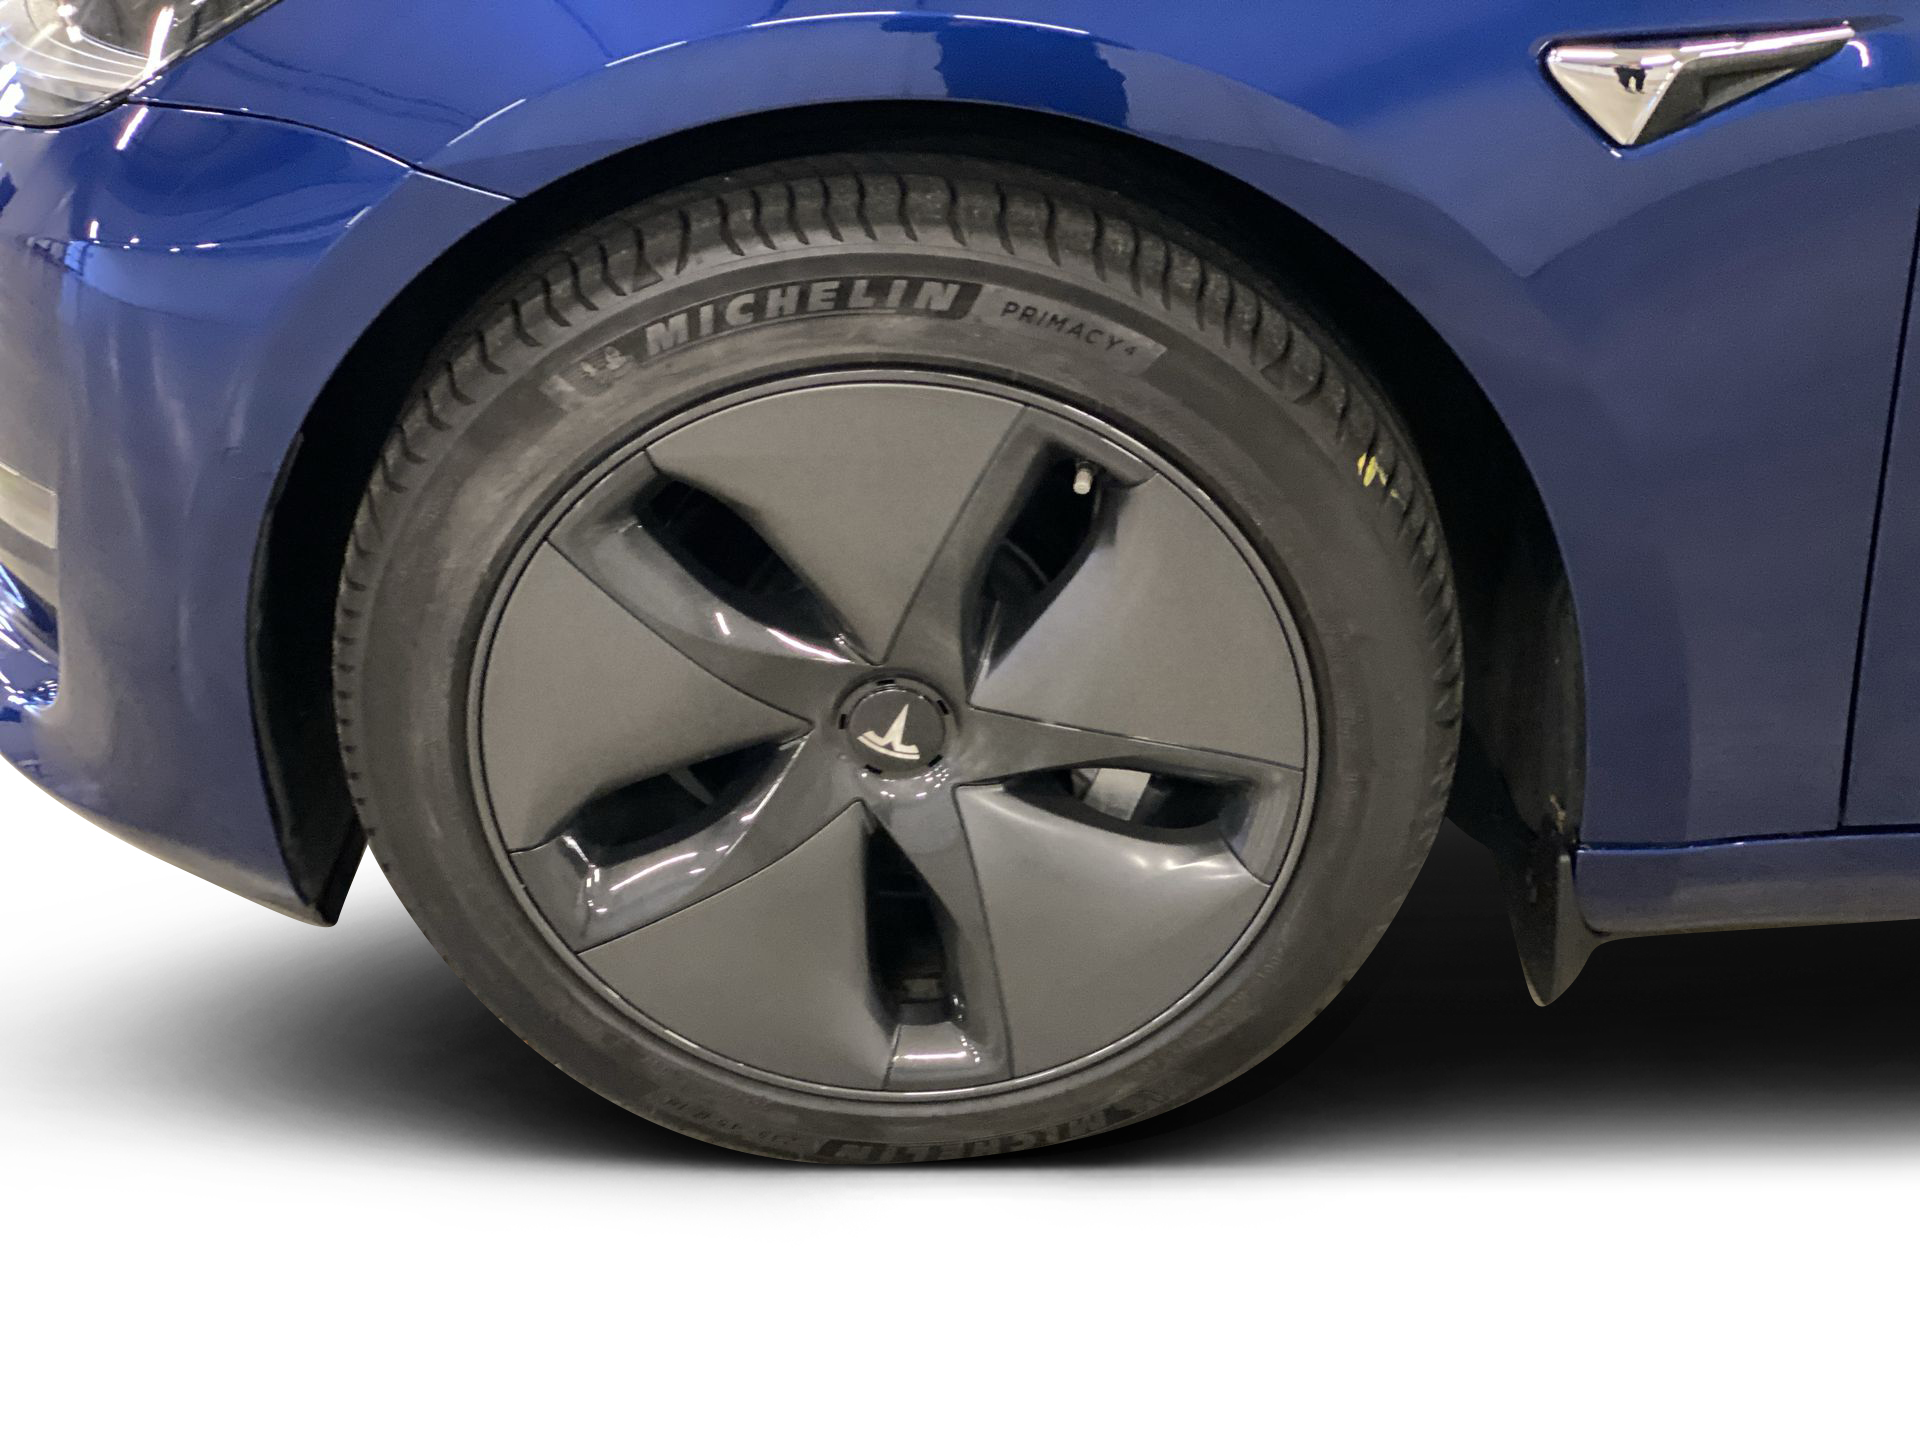 Details for a Driver Side Front Wheel & Tire